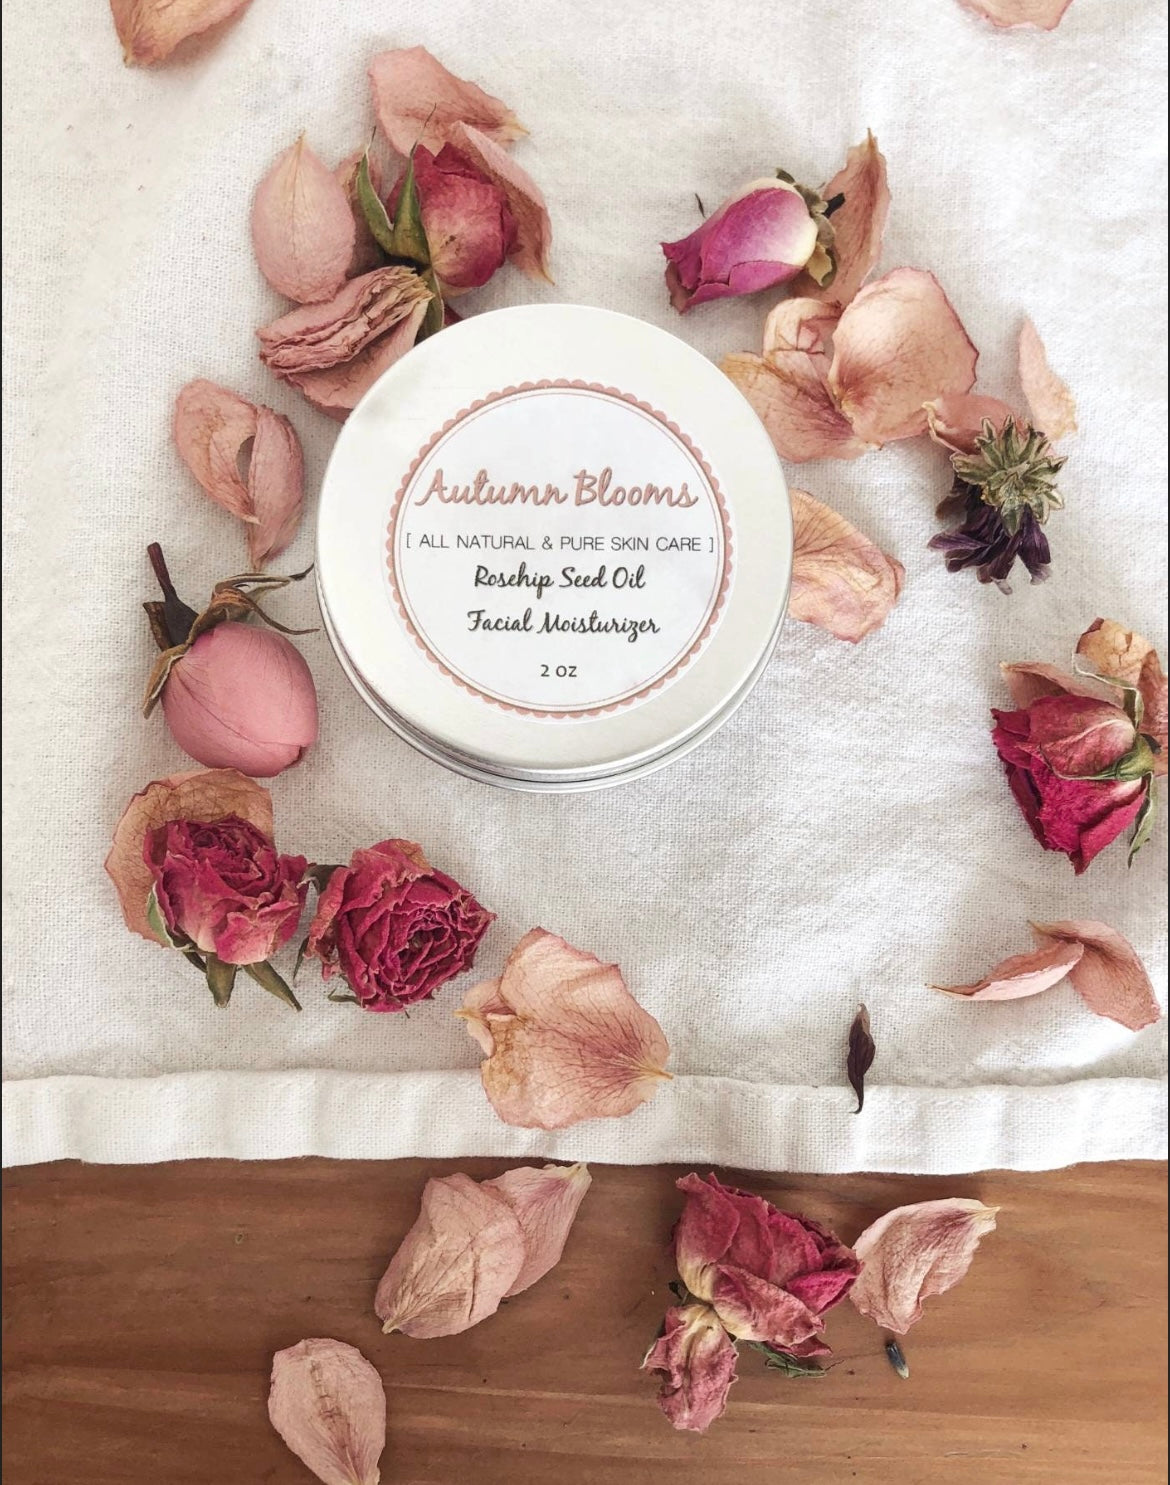 Whipped Rosehip Seed Oil Facial Moisturizer | Facial oil | Natural skin care | Face butter